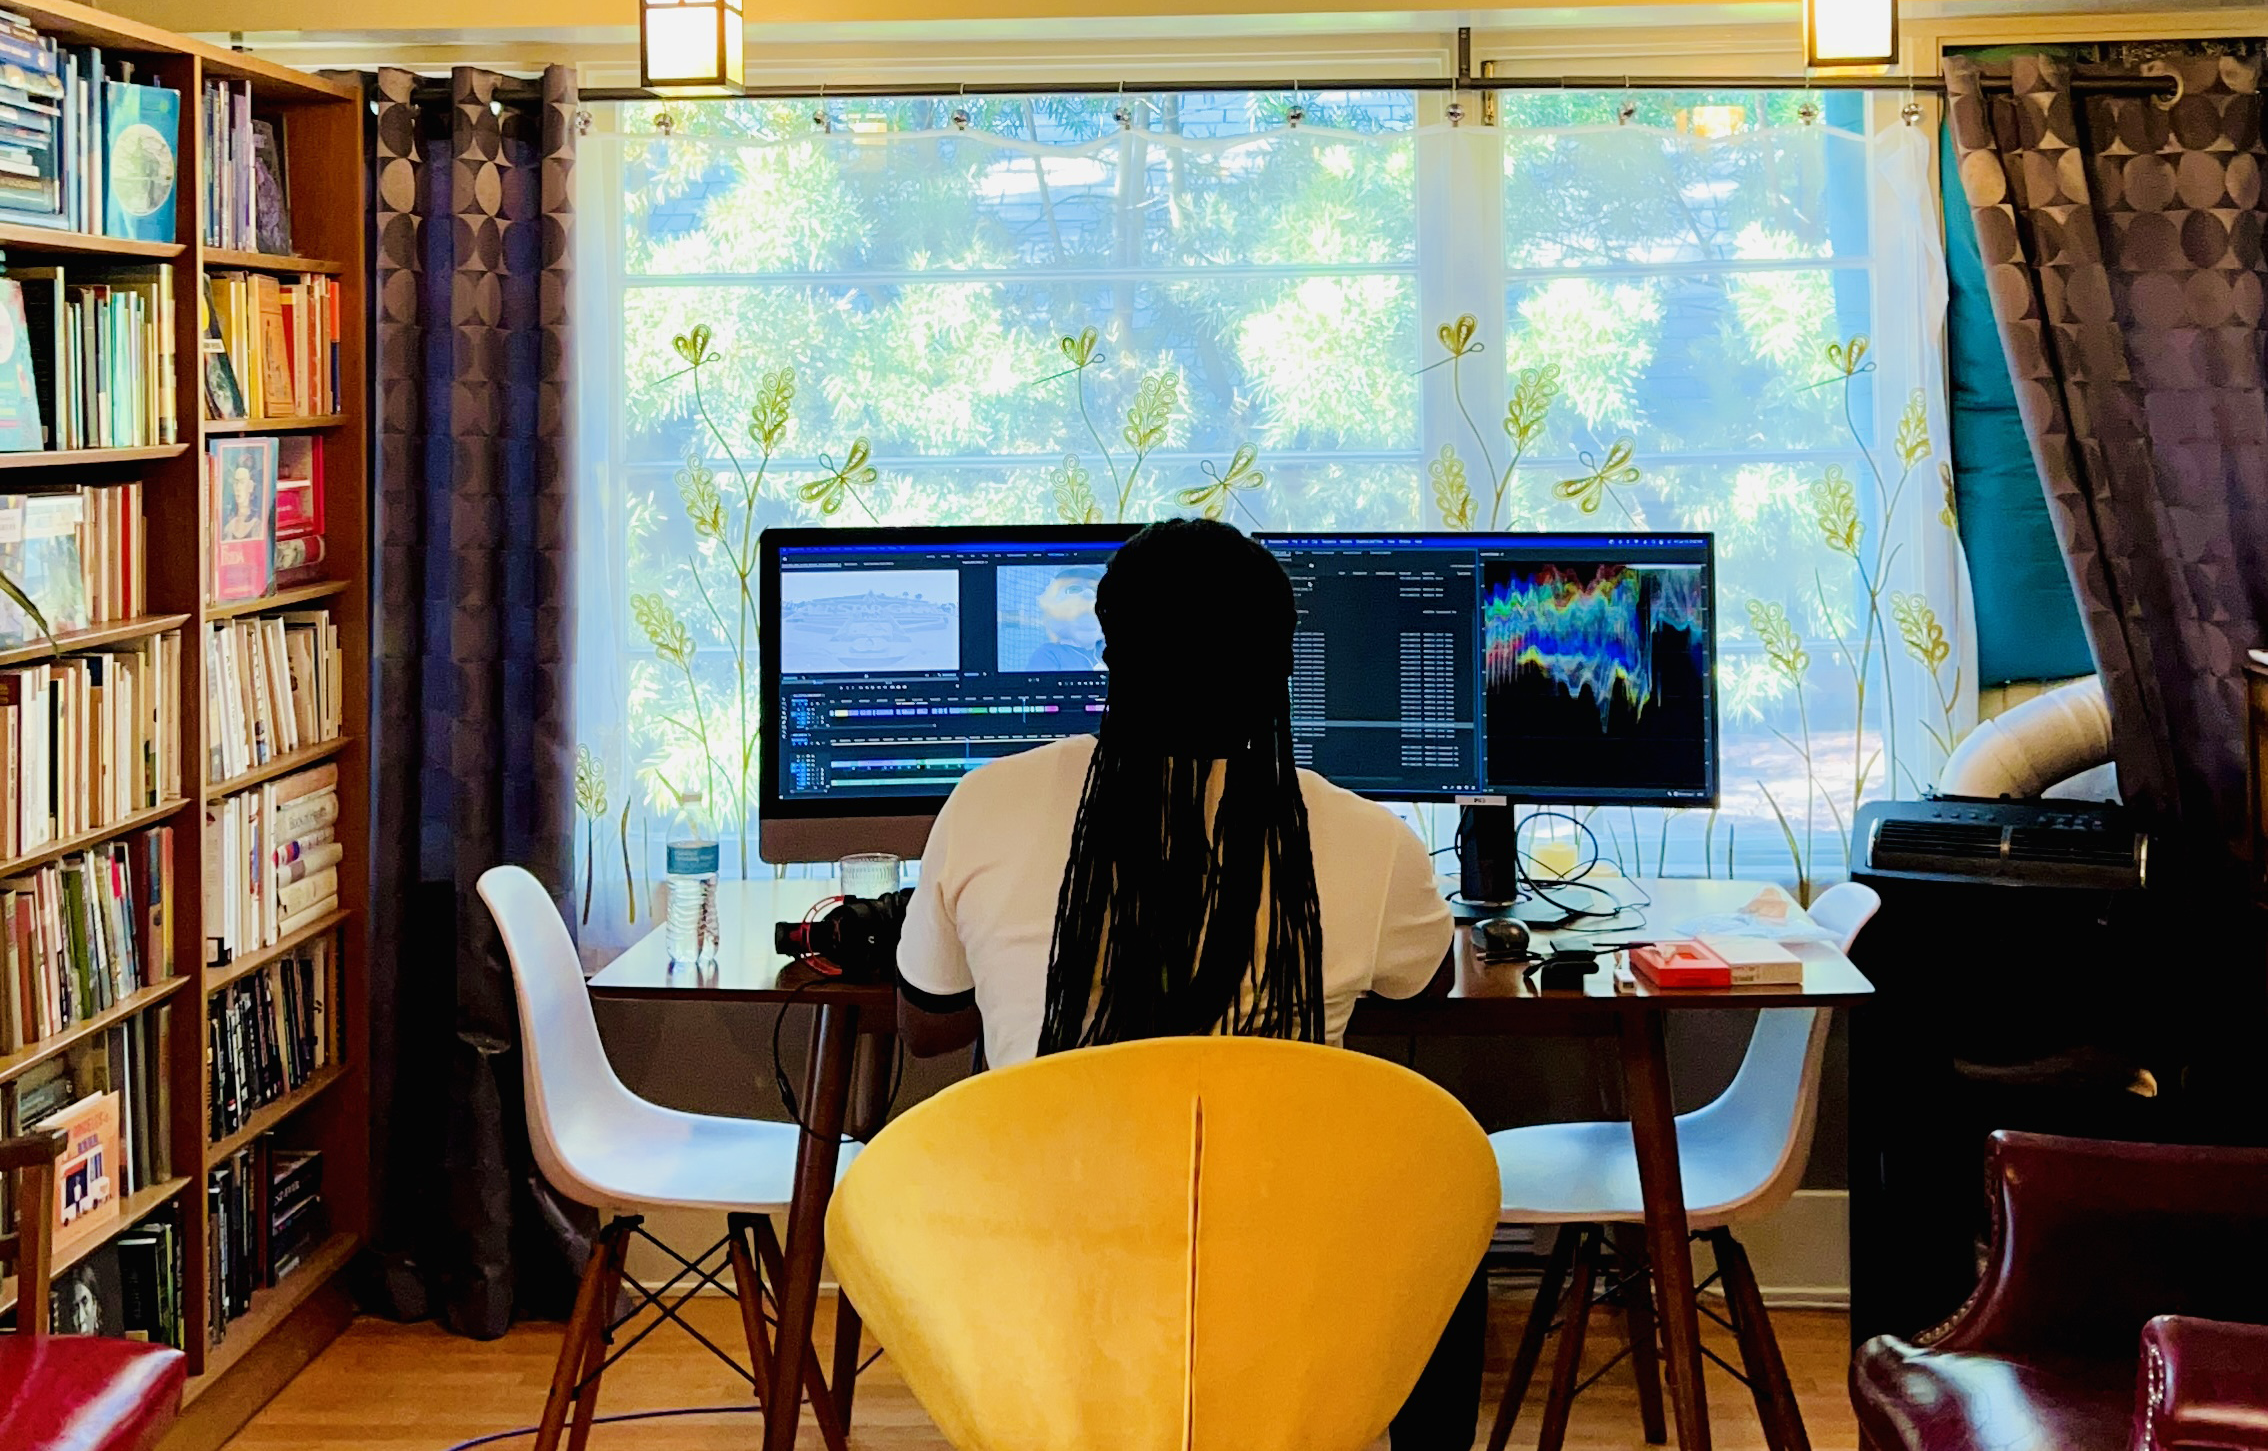 picture of a person editing using two large screens in a room with a view of trees through the window on the other side of the screens